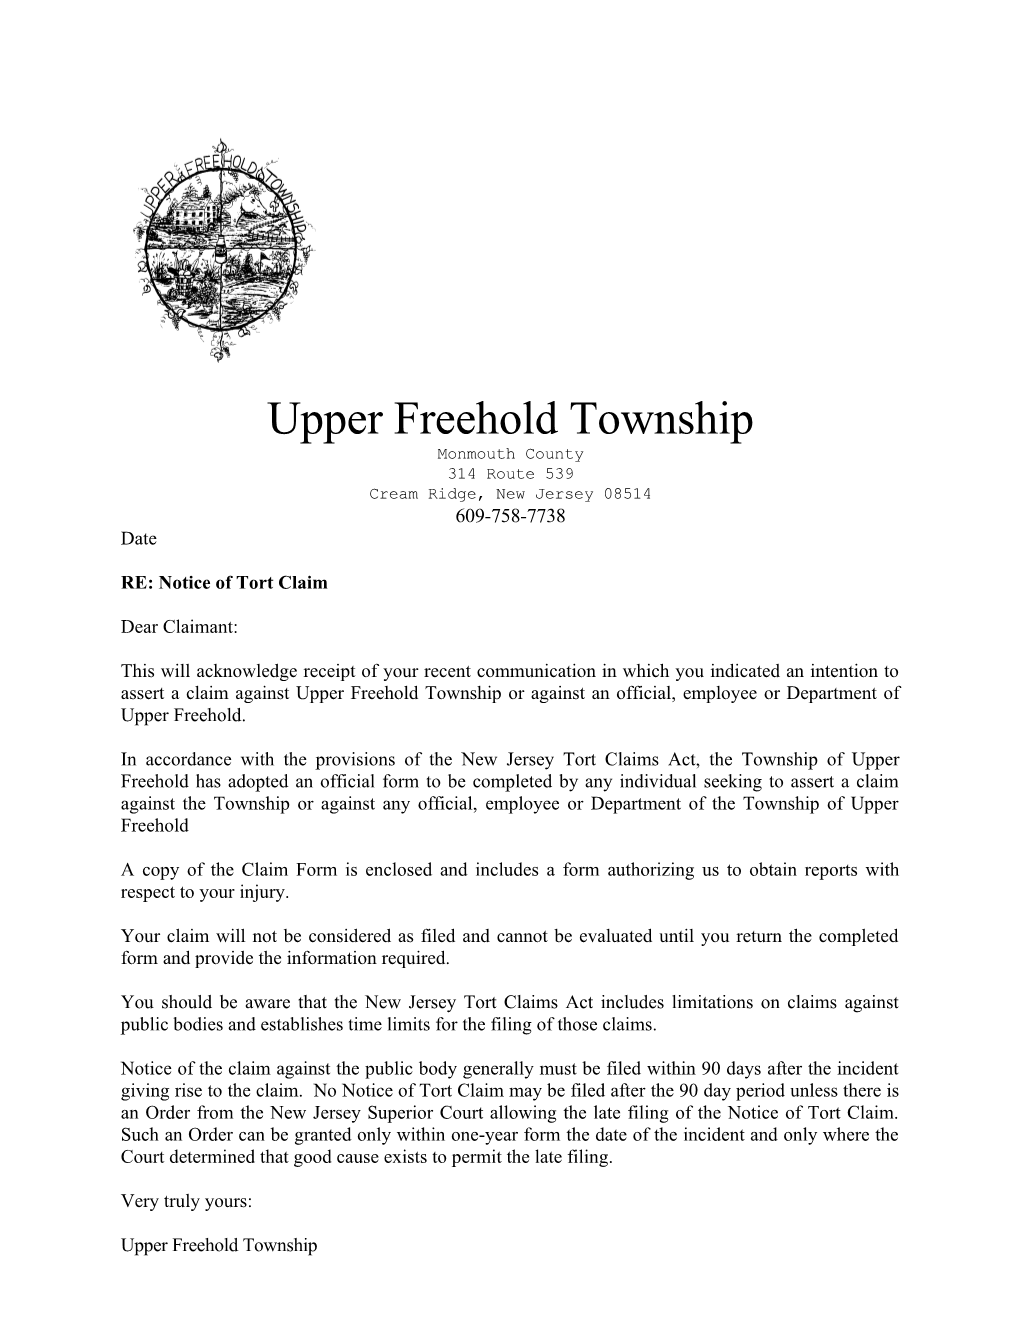 Upper Freehold Township